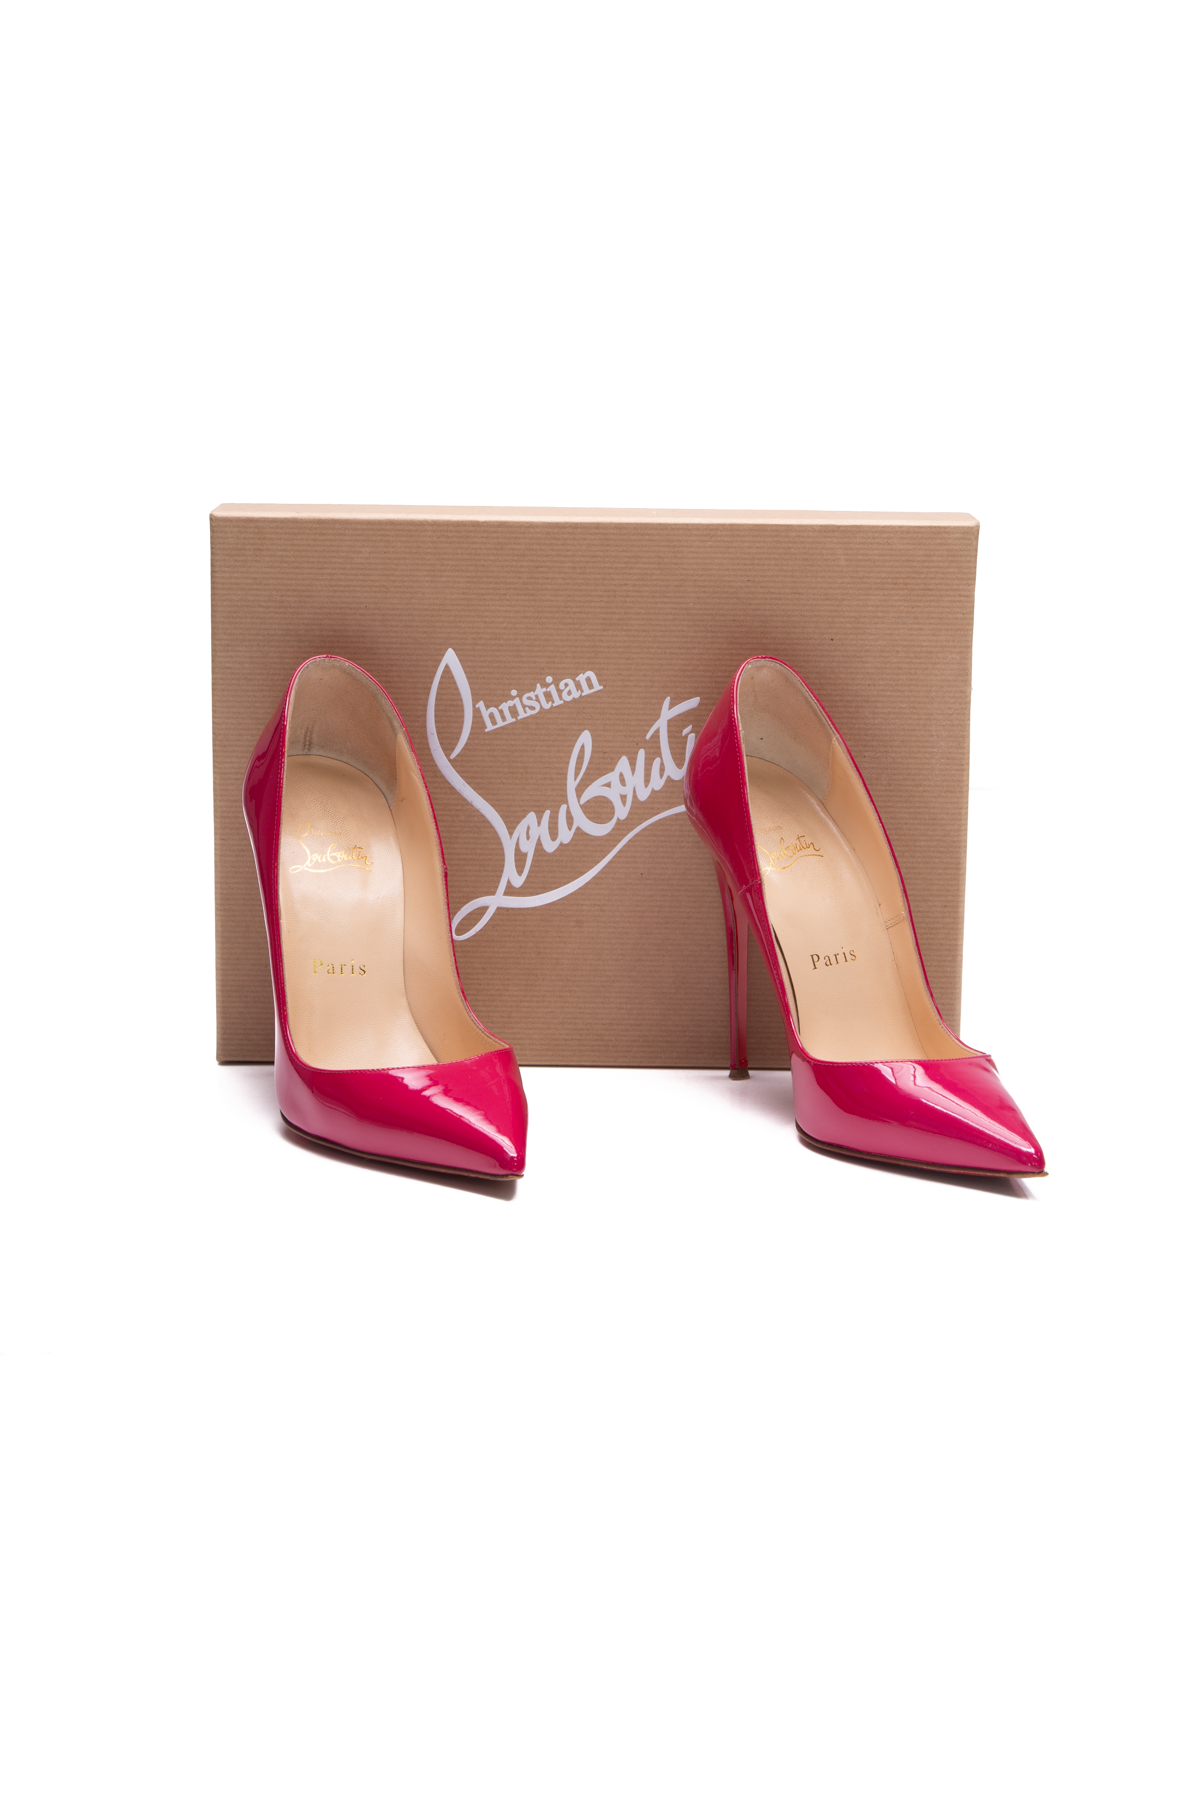 Christian Louboutin Hot Pink Leather So Kate Pumps, Size 36/US 6